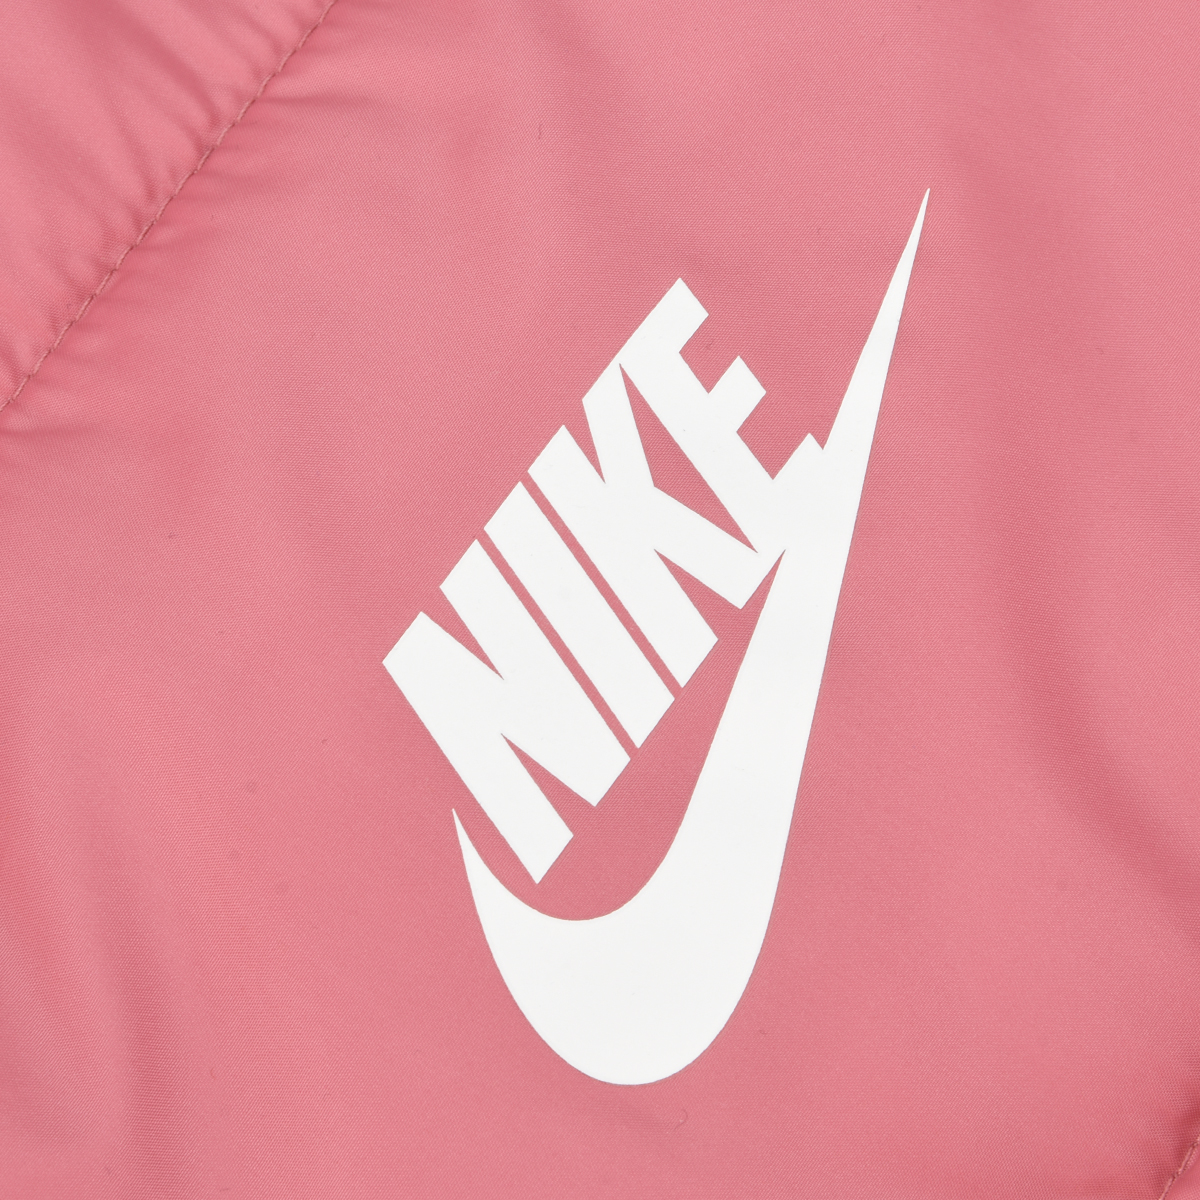 Campera Nike Sportswear Therma-Fit Repel,  image number null